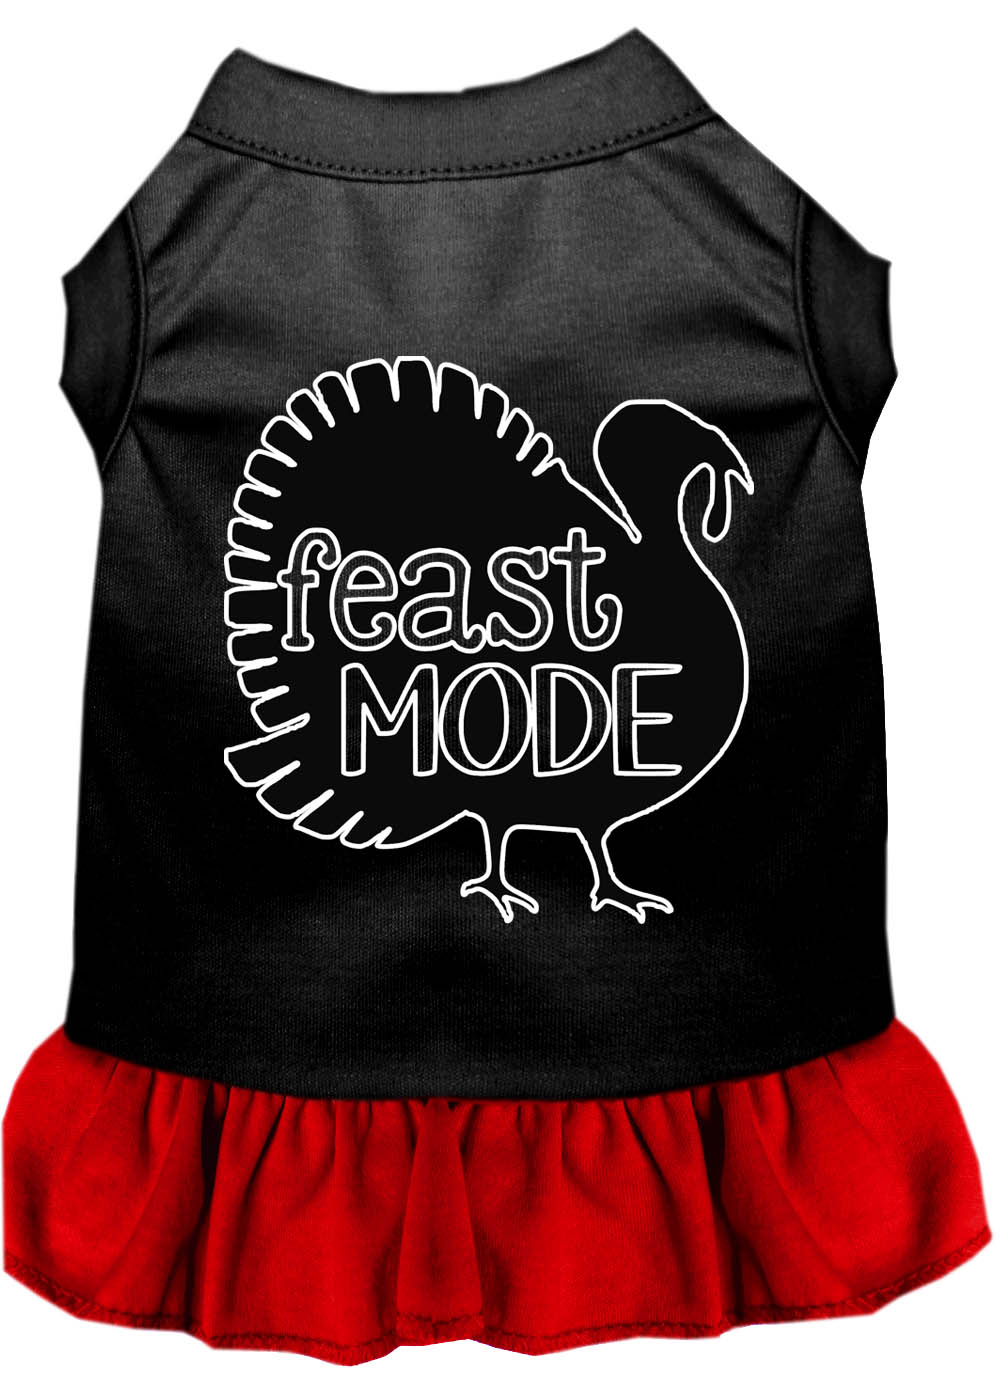 Feast Mode Screen Print Dog Dress Black with Red Lg